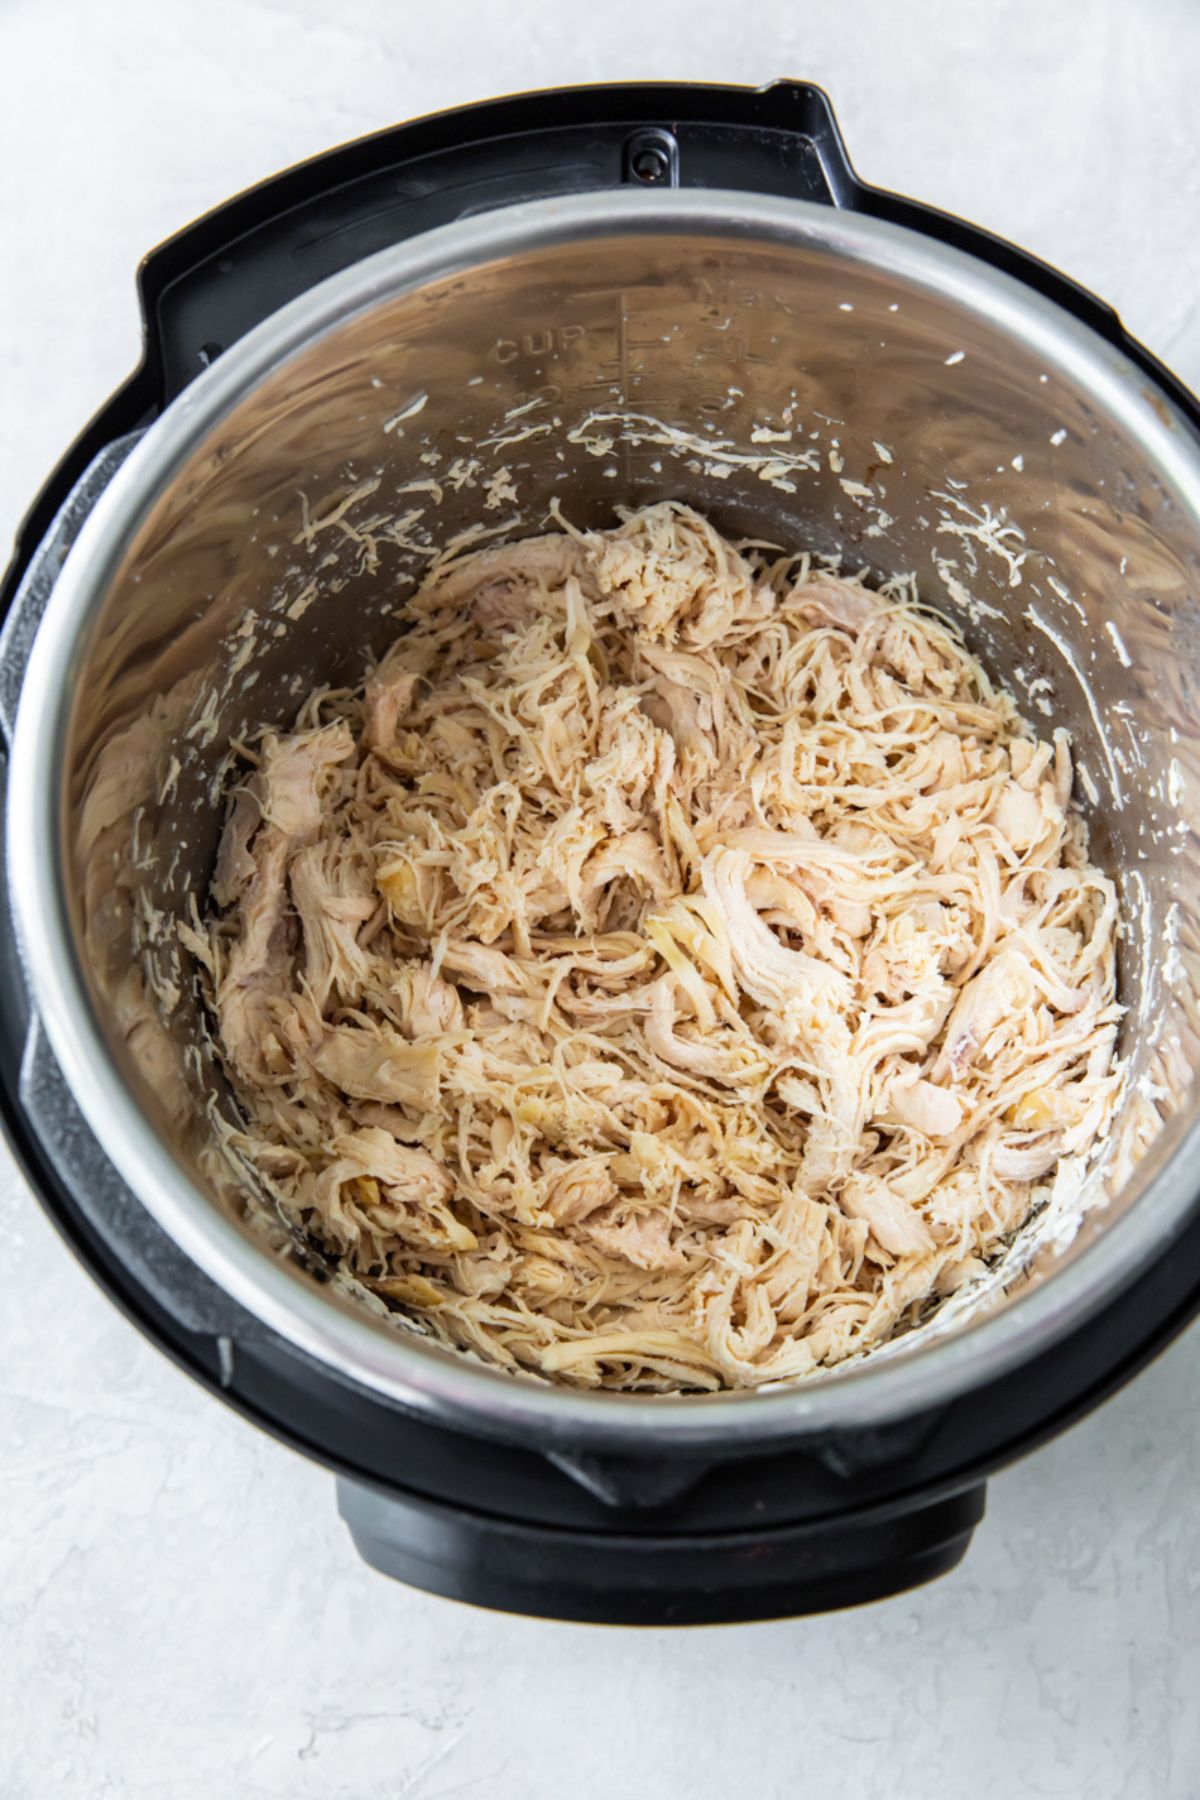 frozen shredded chicken breasts cooked in the Instant Pot